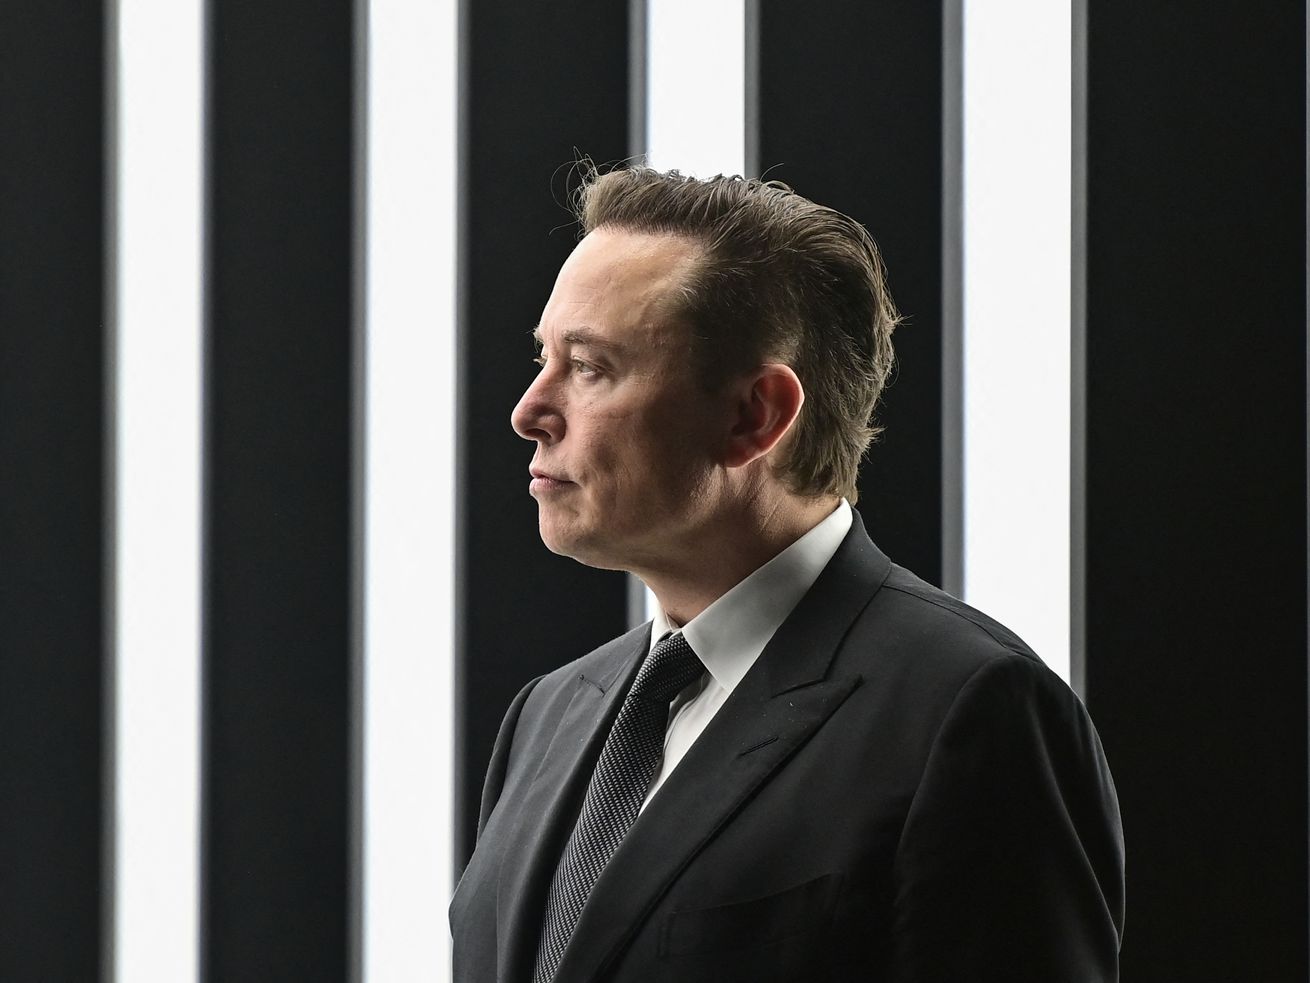 A comprehensive guide to how Elon Musk is changing Twitter